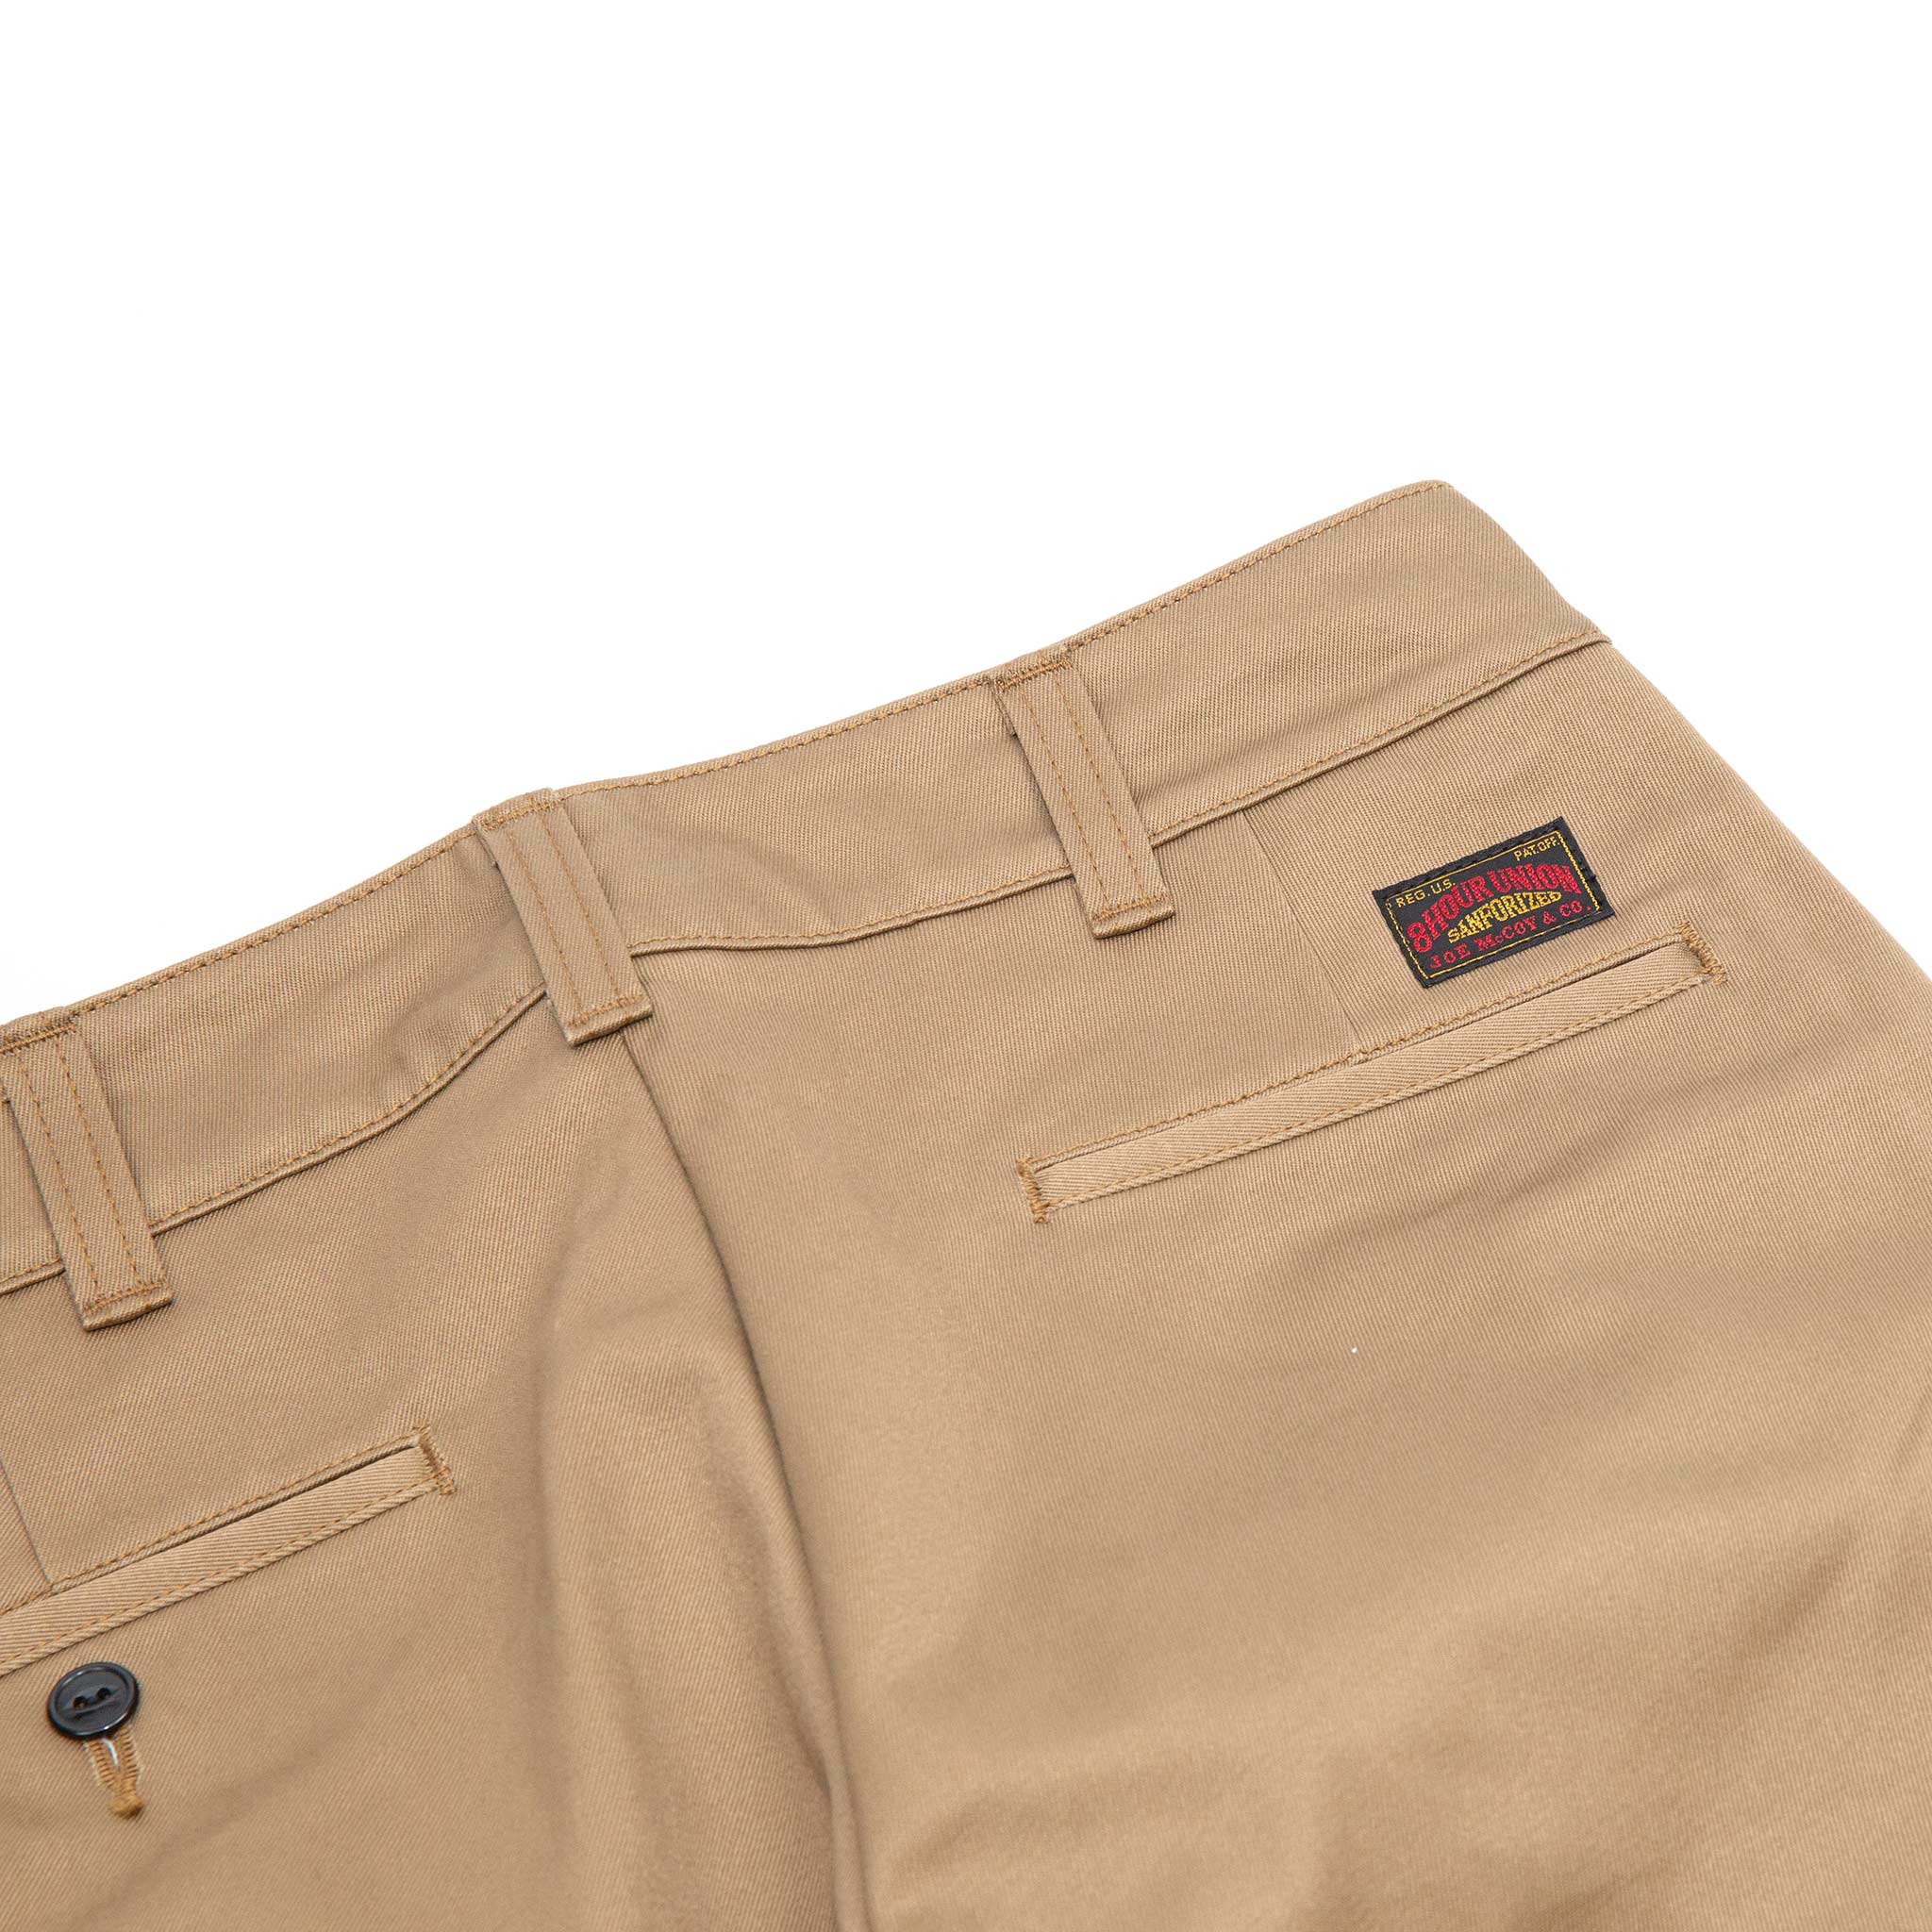 The Real McCoy's MP20104 8HU Heavy Cotton Drill Full-Cut Work Trousers